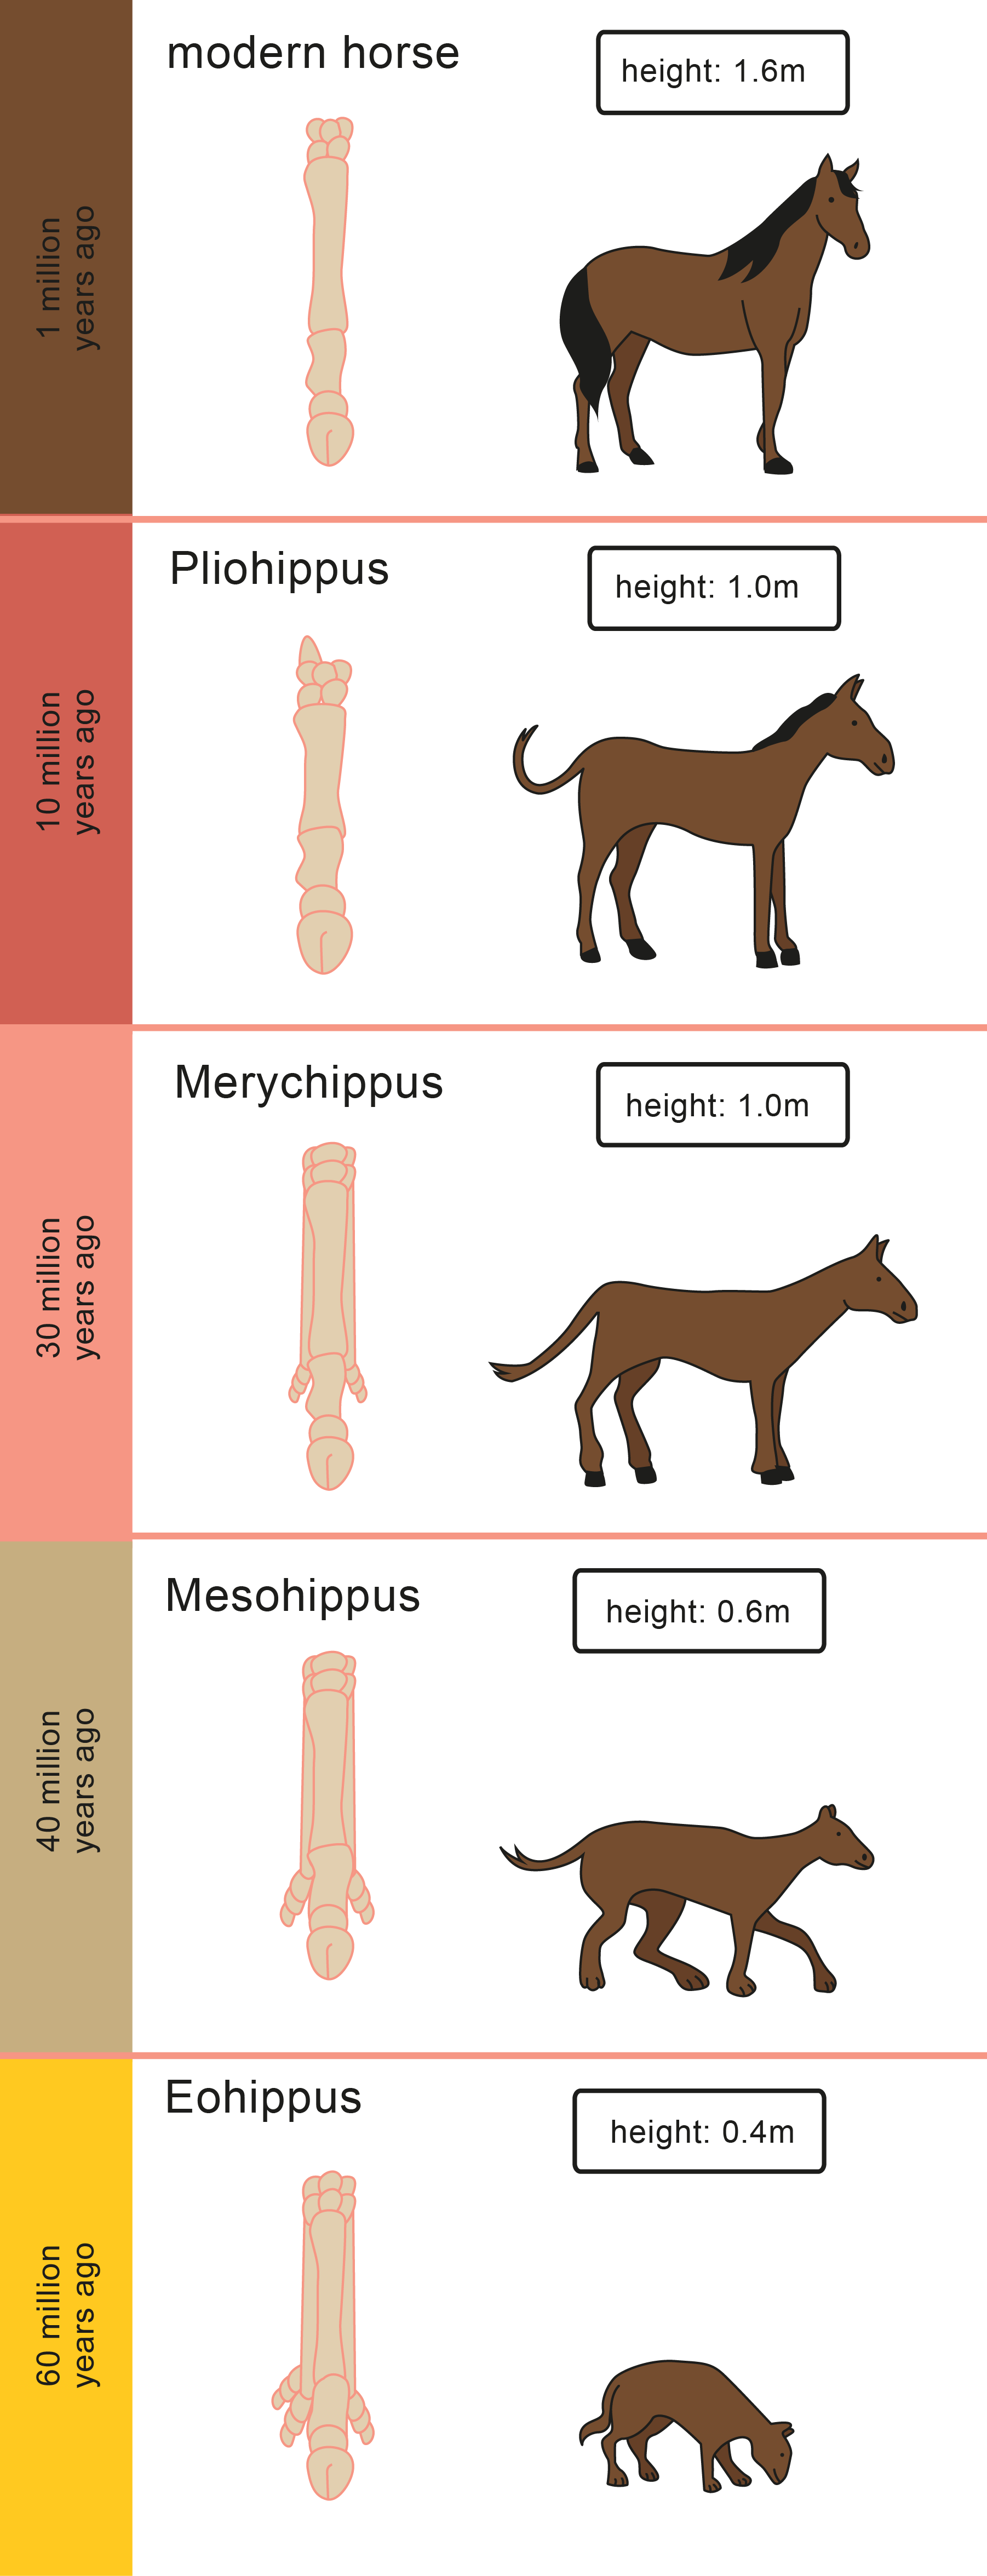 Image of the evolution of a horses leg.